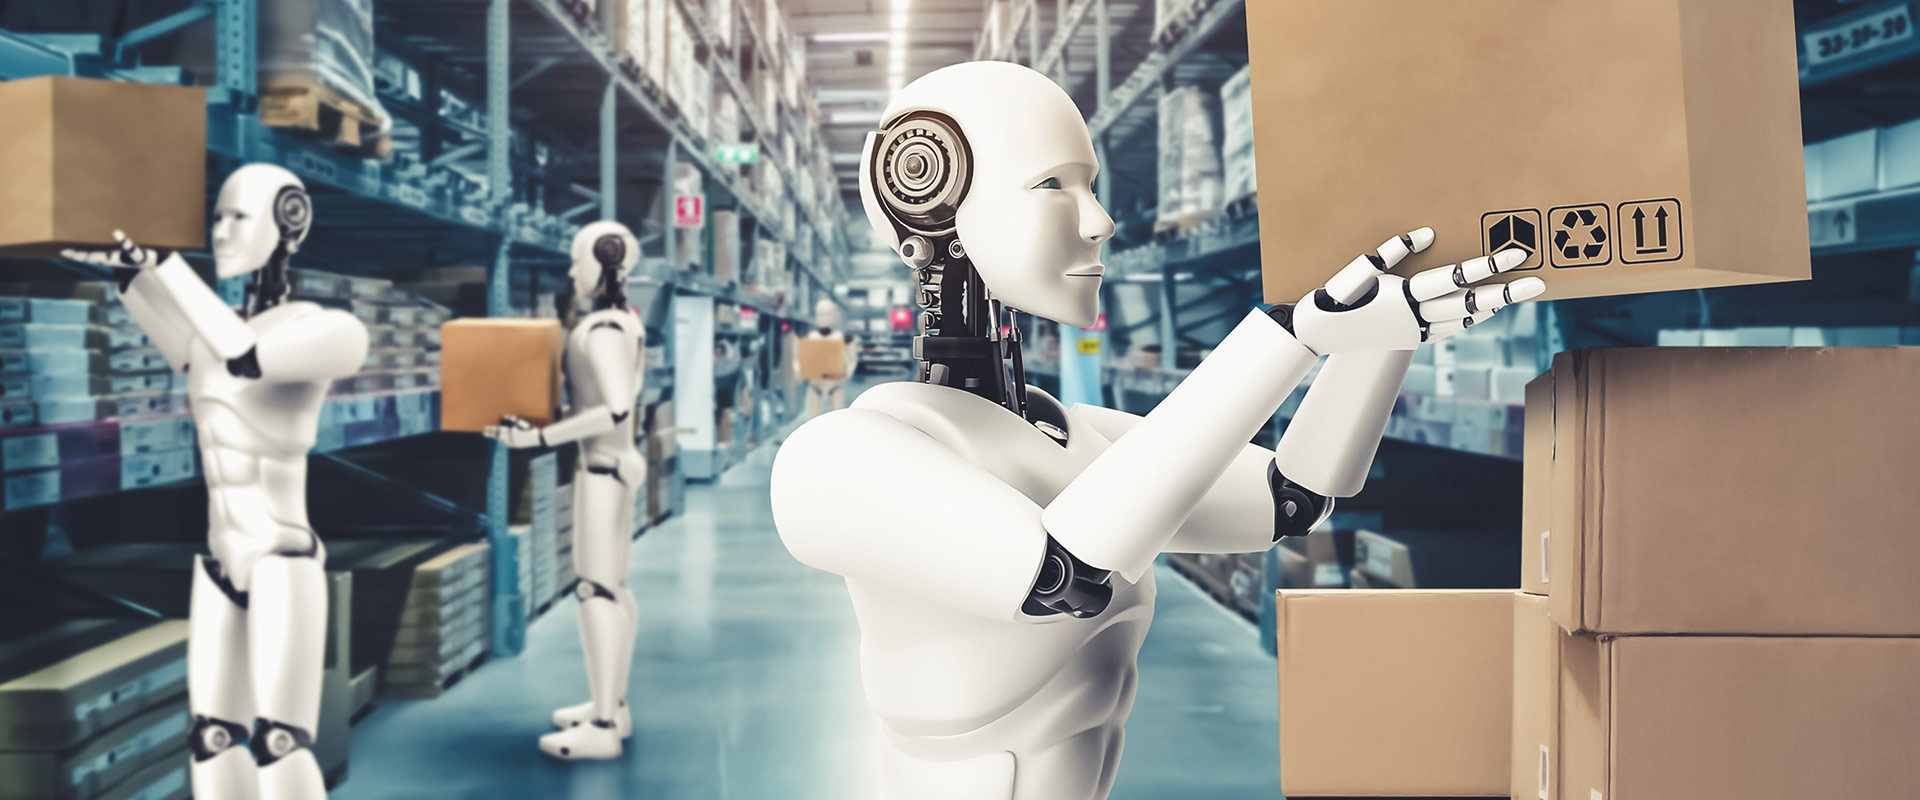 Will Robots Take Jobs? - KnowHow